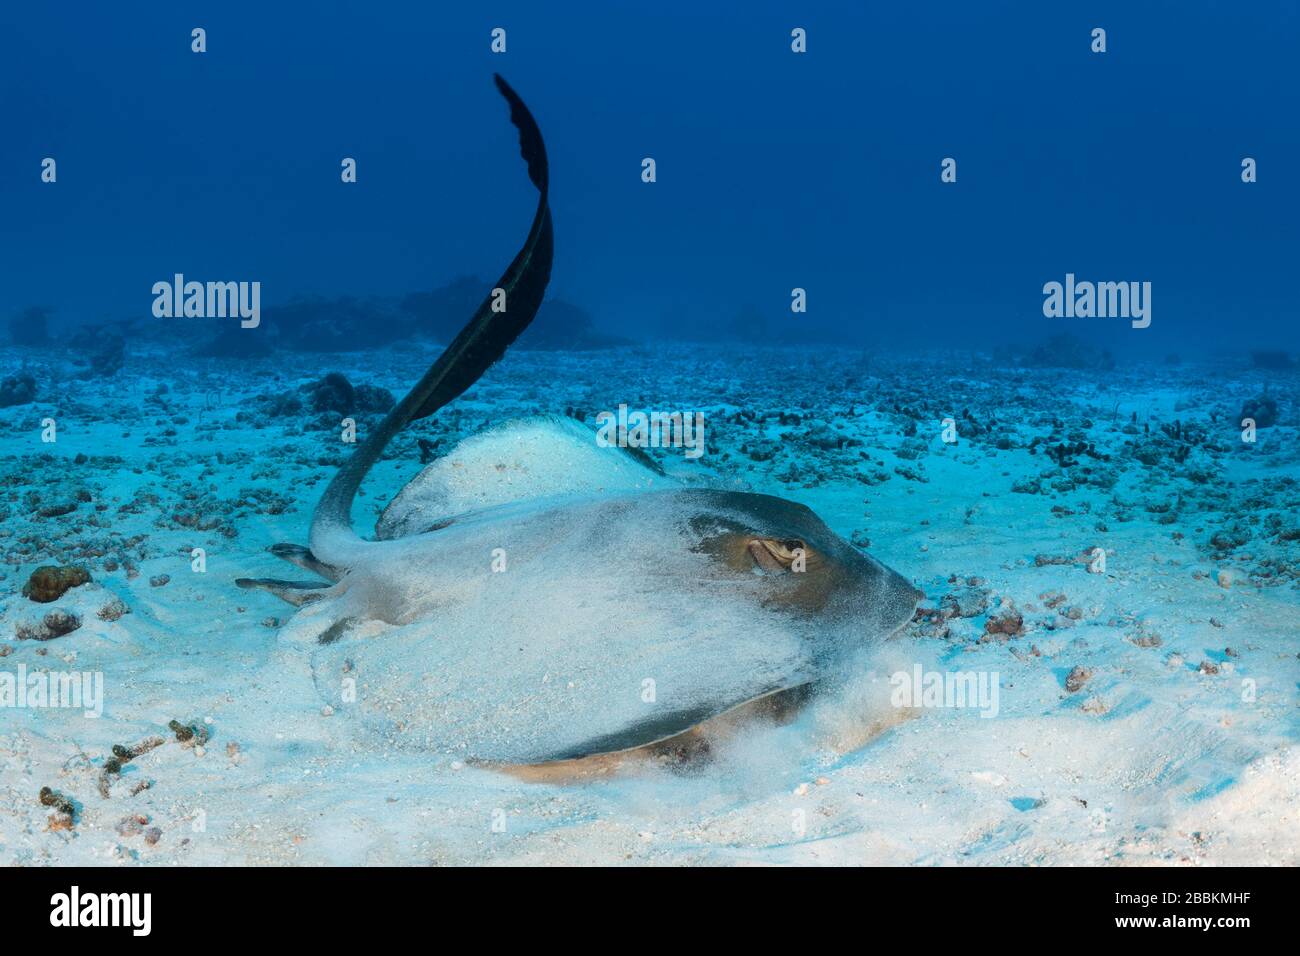 Cowtail stingray (Pastinachus sephen) strikes with tail and starts from the sandy bottom, Indian Ocean, Maldives Stock Photo